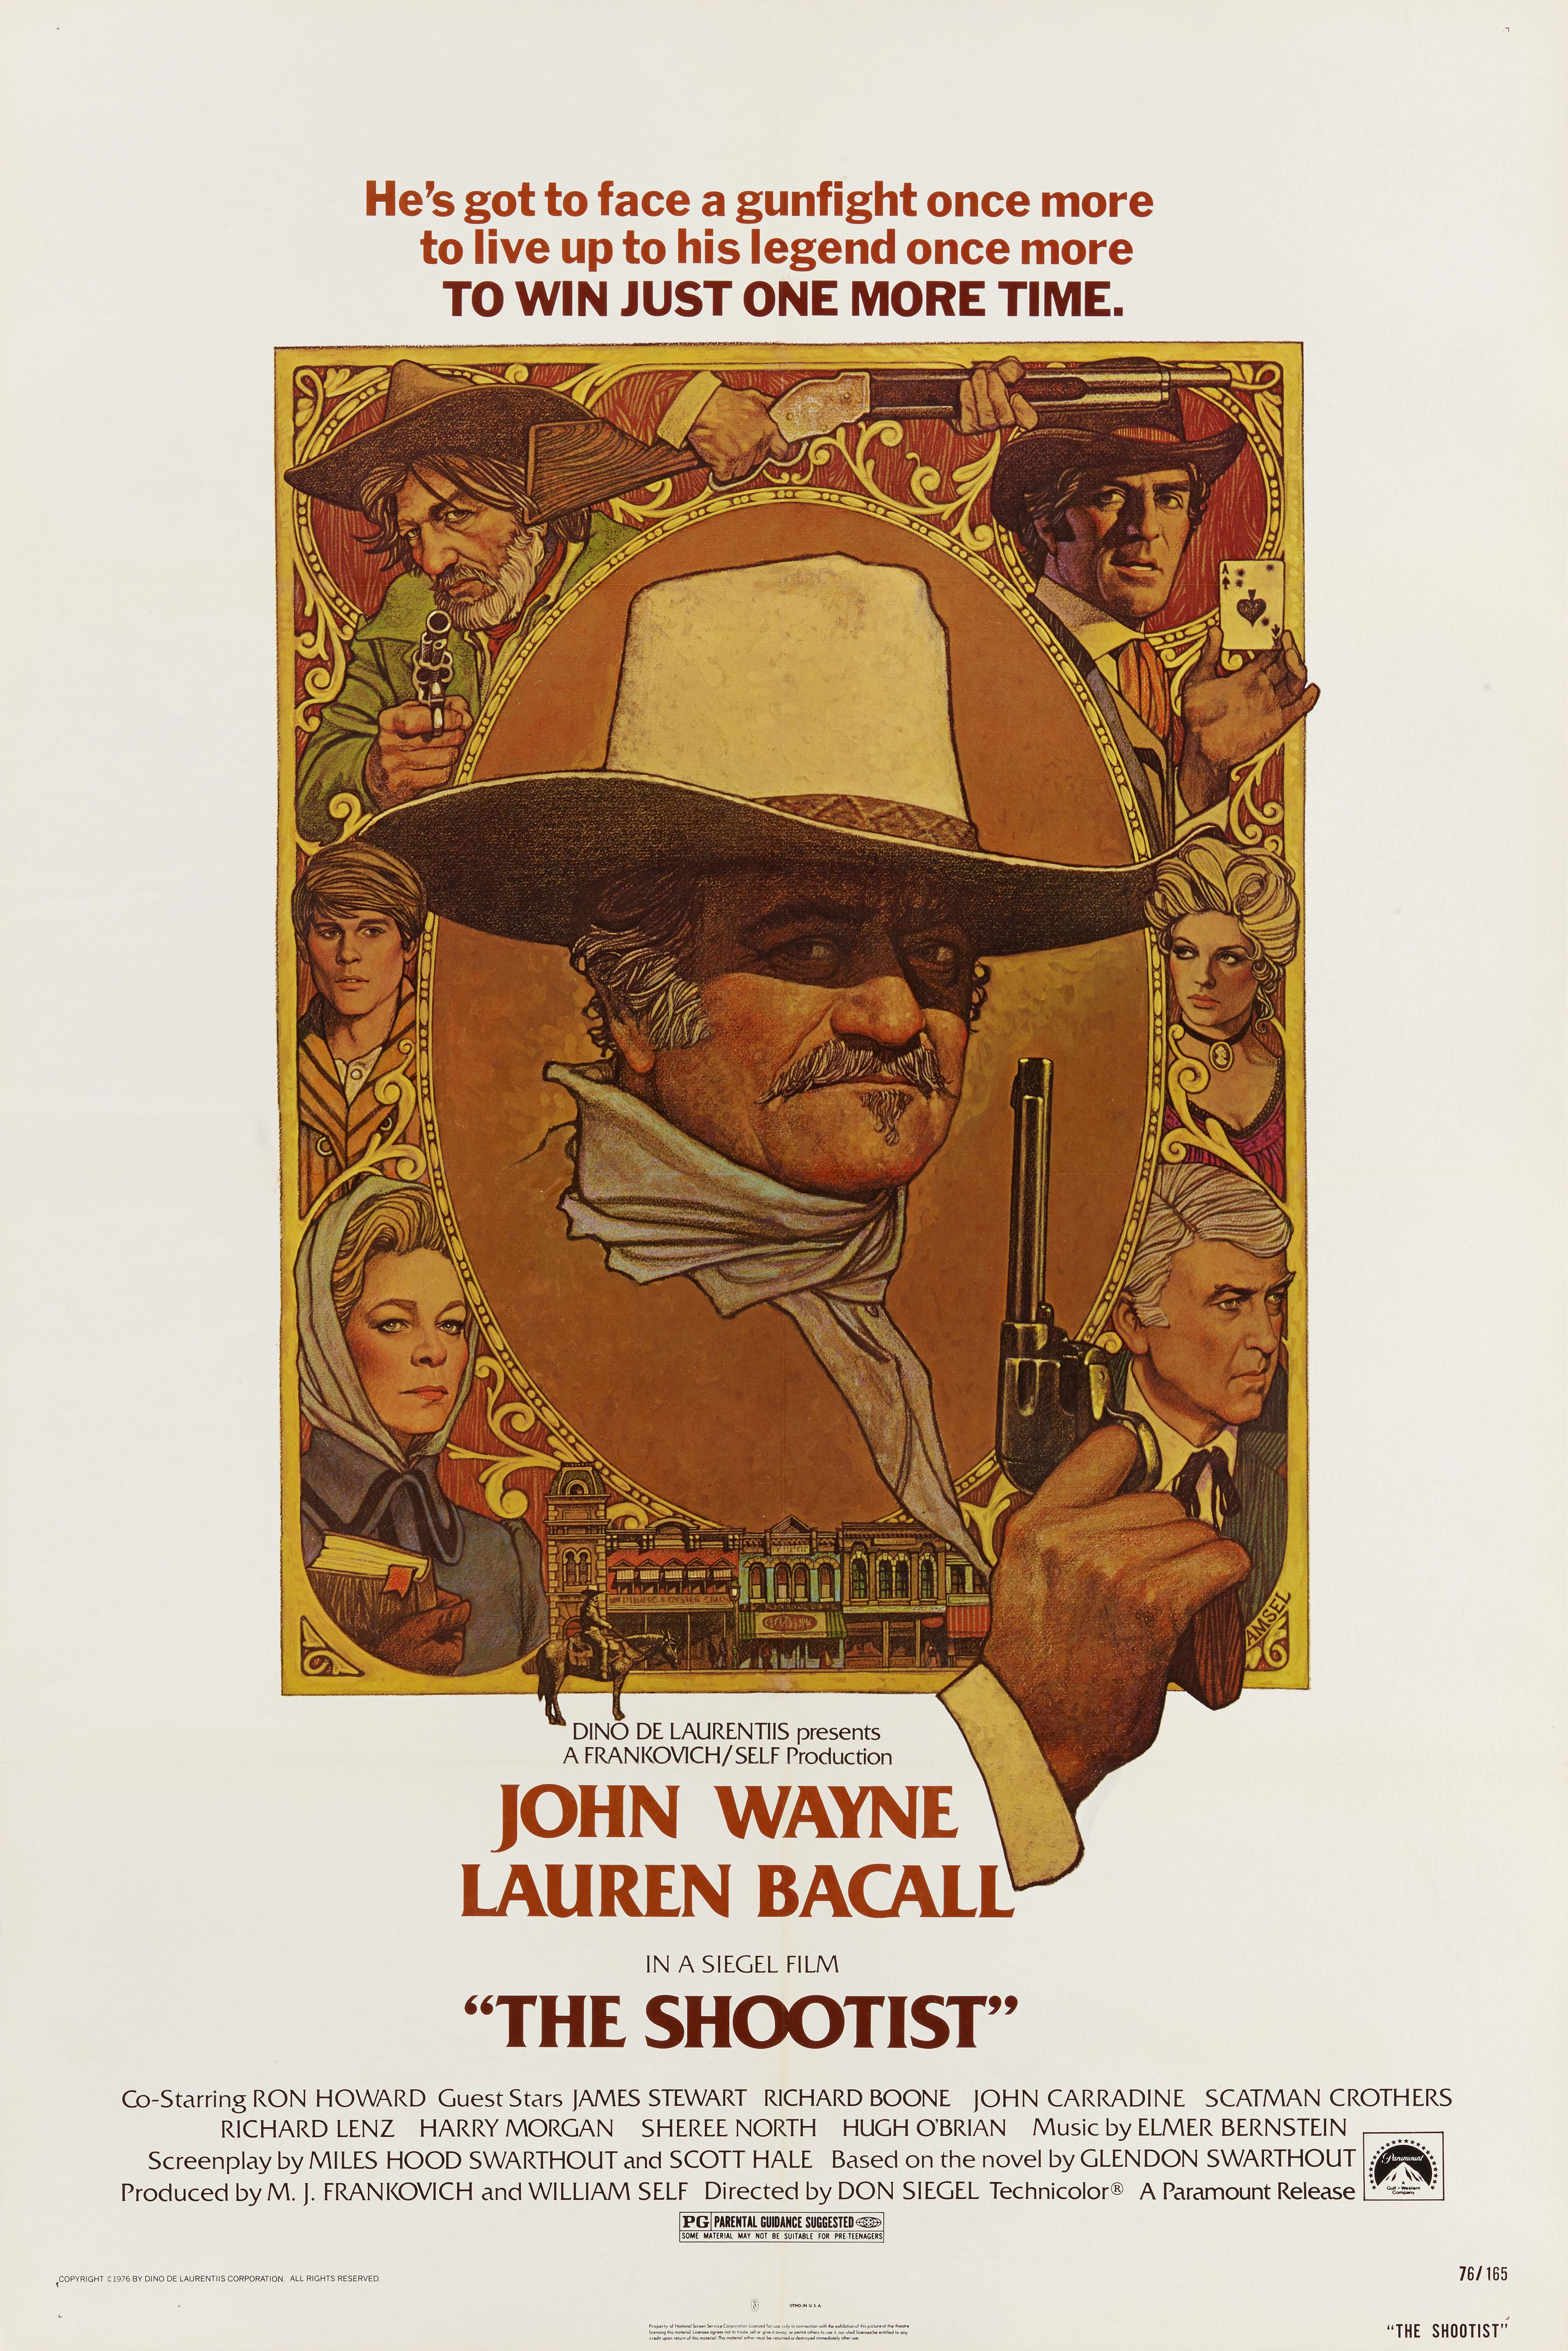 Original US movie poster for John Wayne's last film The Shootist 1976.
The artwork is by the highly acclaimed illustrator Richard Amsel (1947-1985).
The film was directed by Don Siegel.
The poster is in excellent condition with the colours